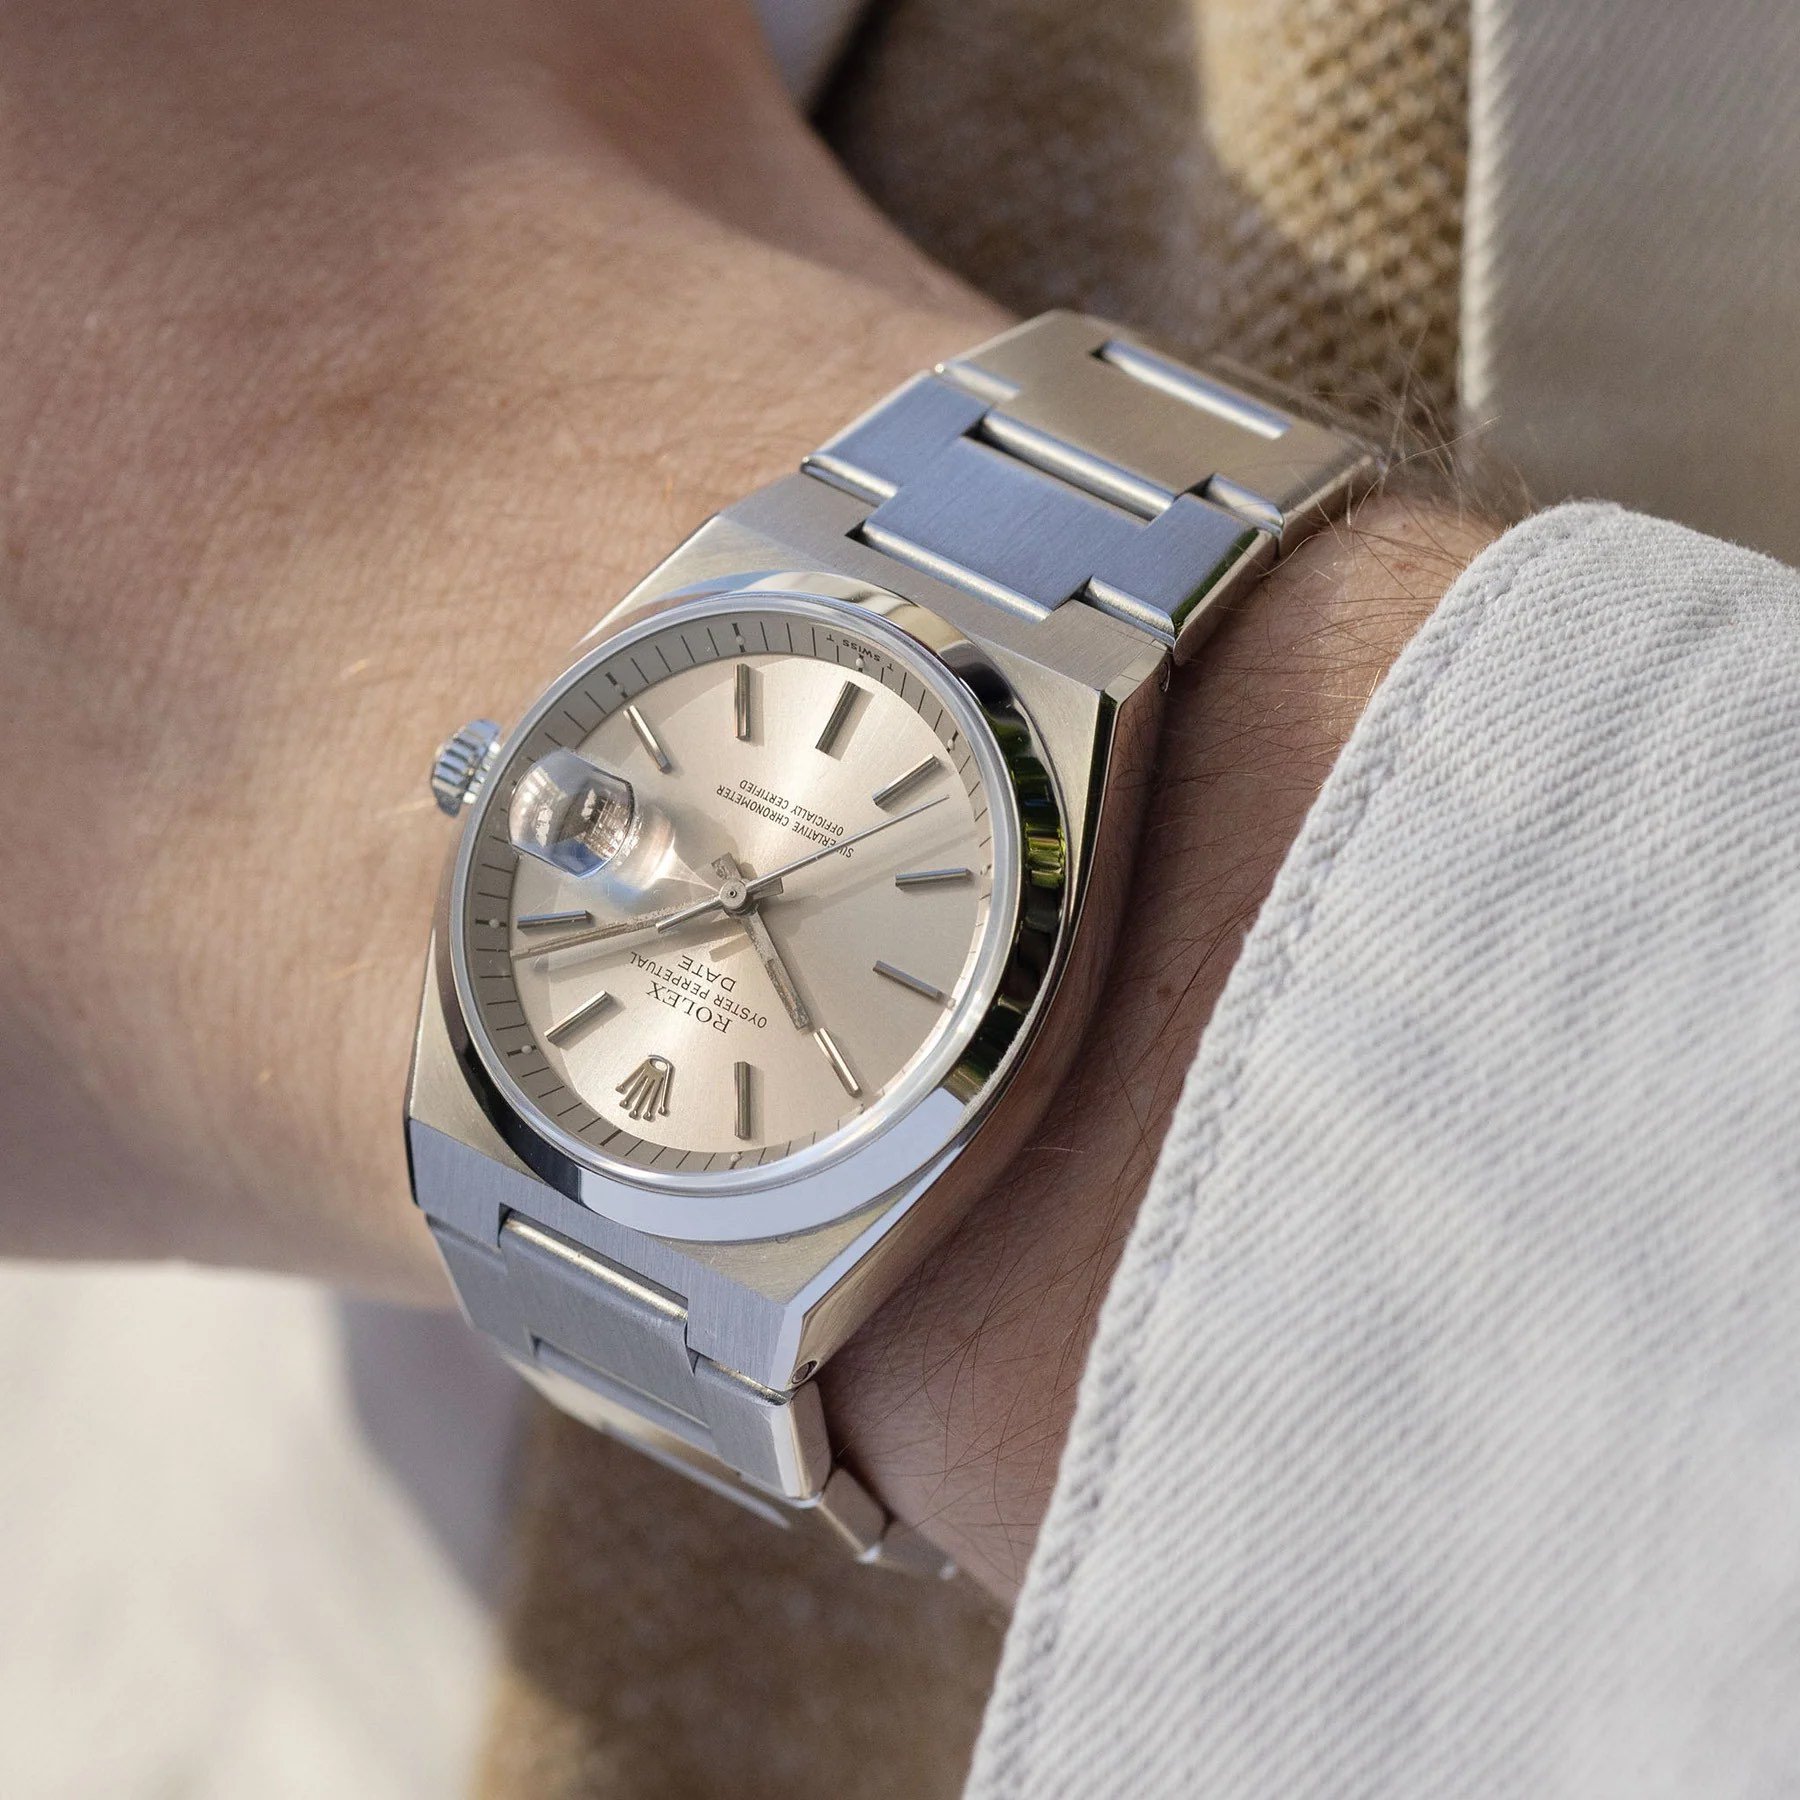 oddball Rolex watches Oyster Perpetual Date ref. 1530